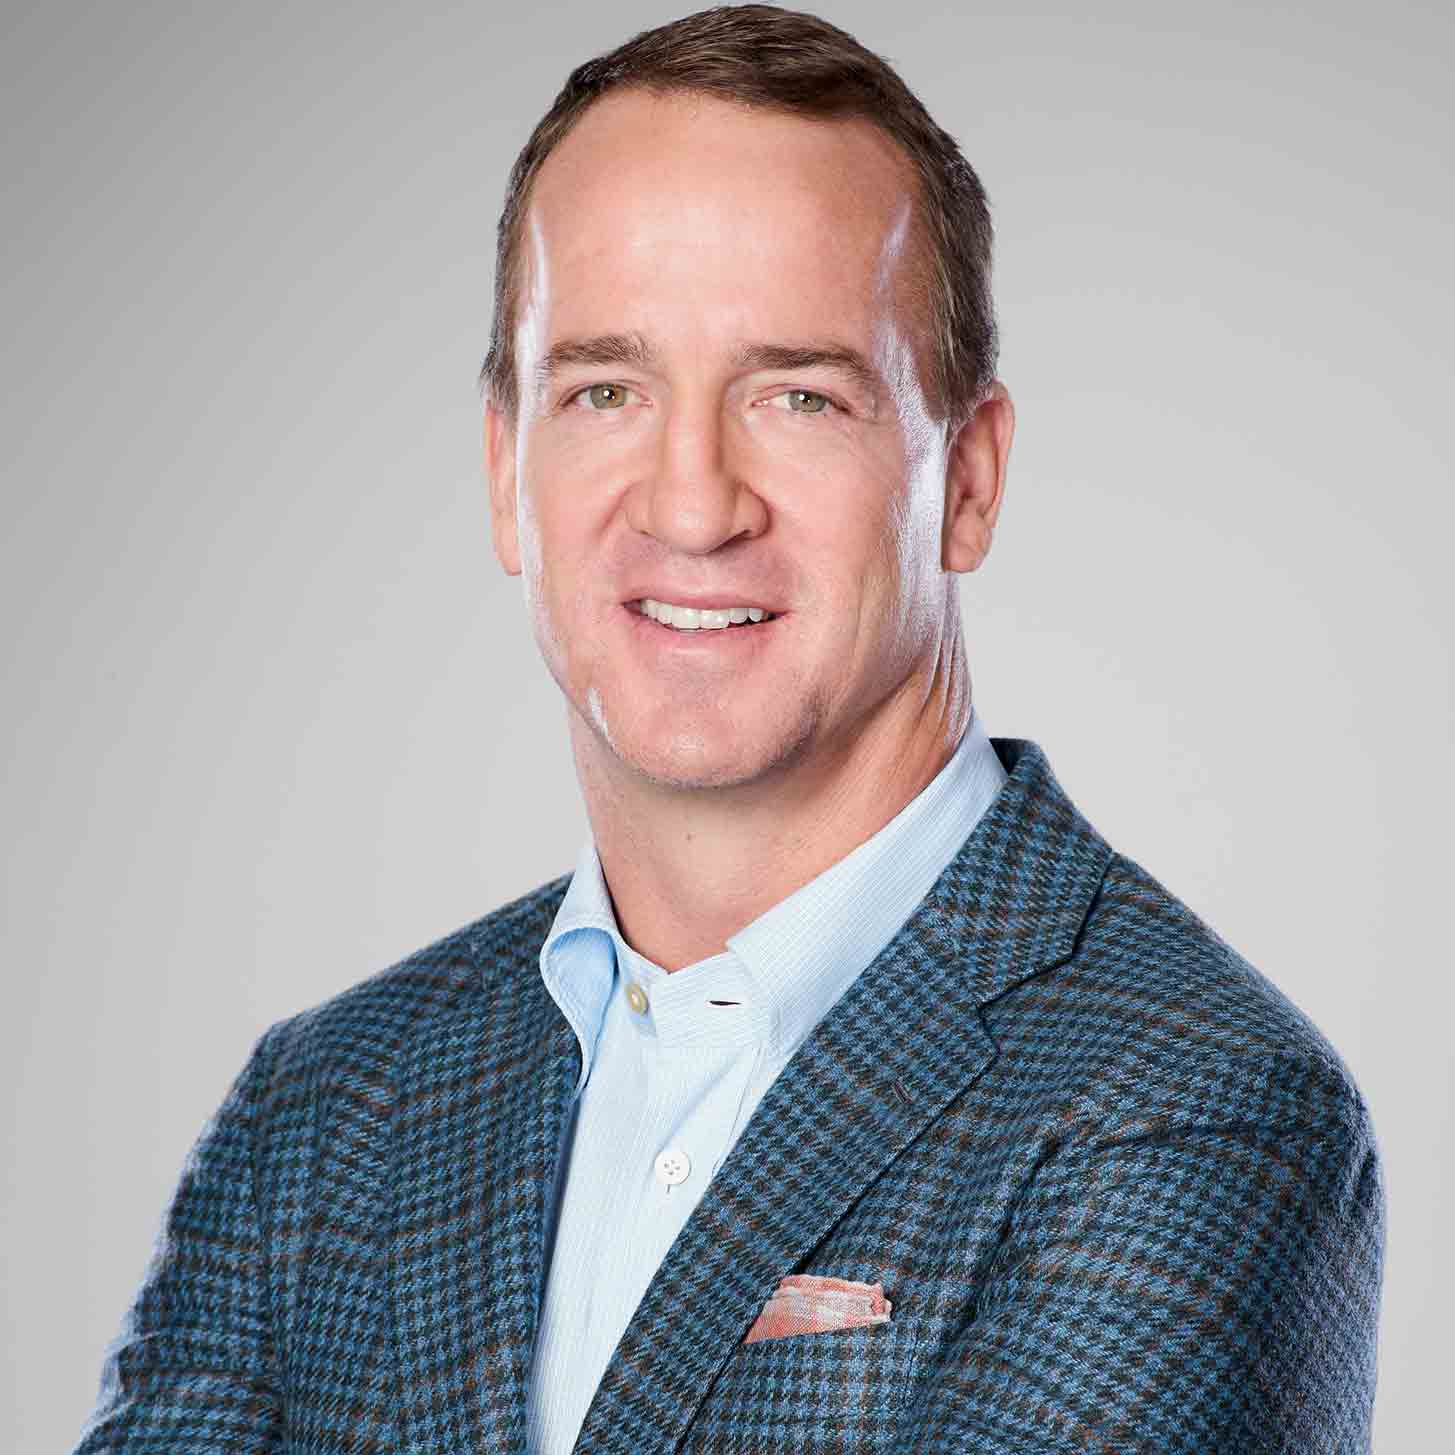 PEYTON MANNING Capital One College Bowl host